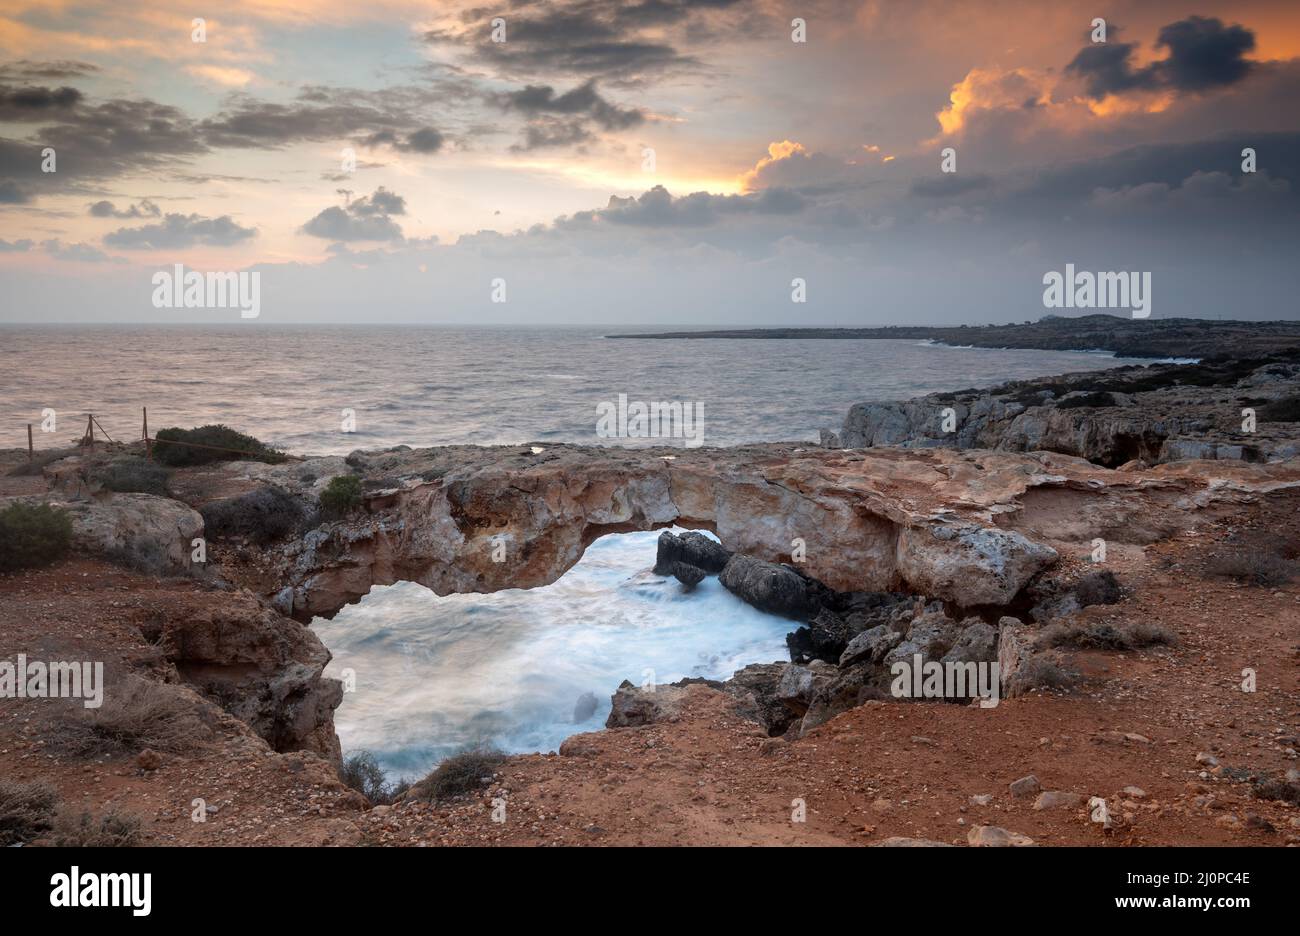 Seascape with windy waves during stormy weather at sunset. Cape greko Cyprus Stock Photo